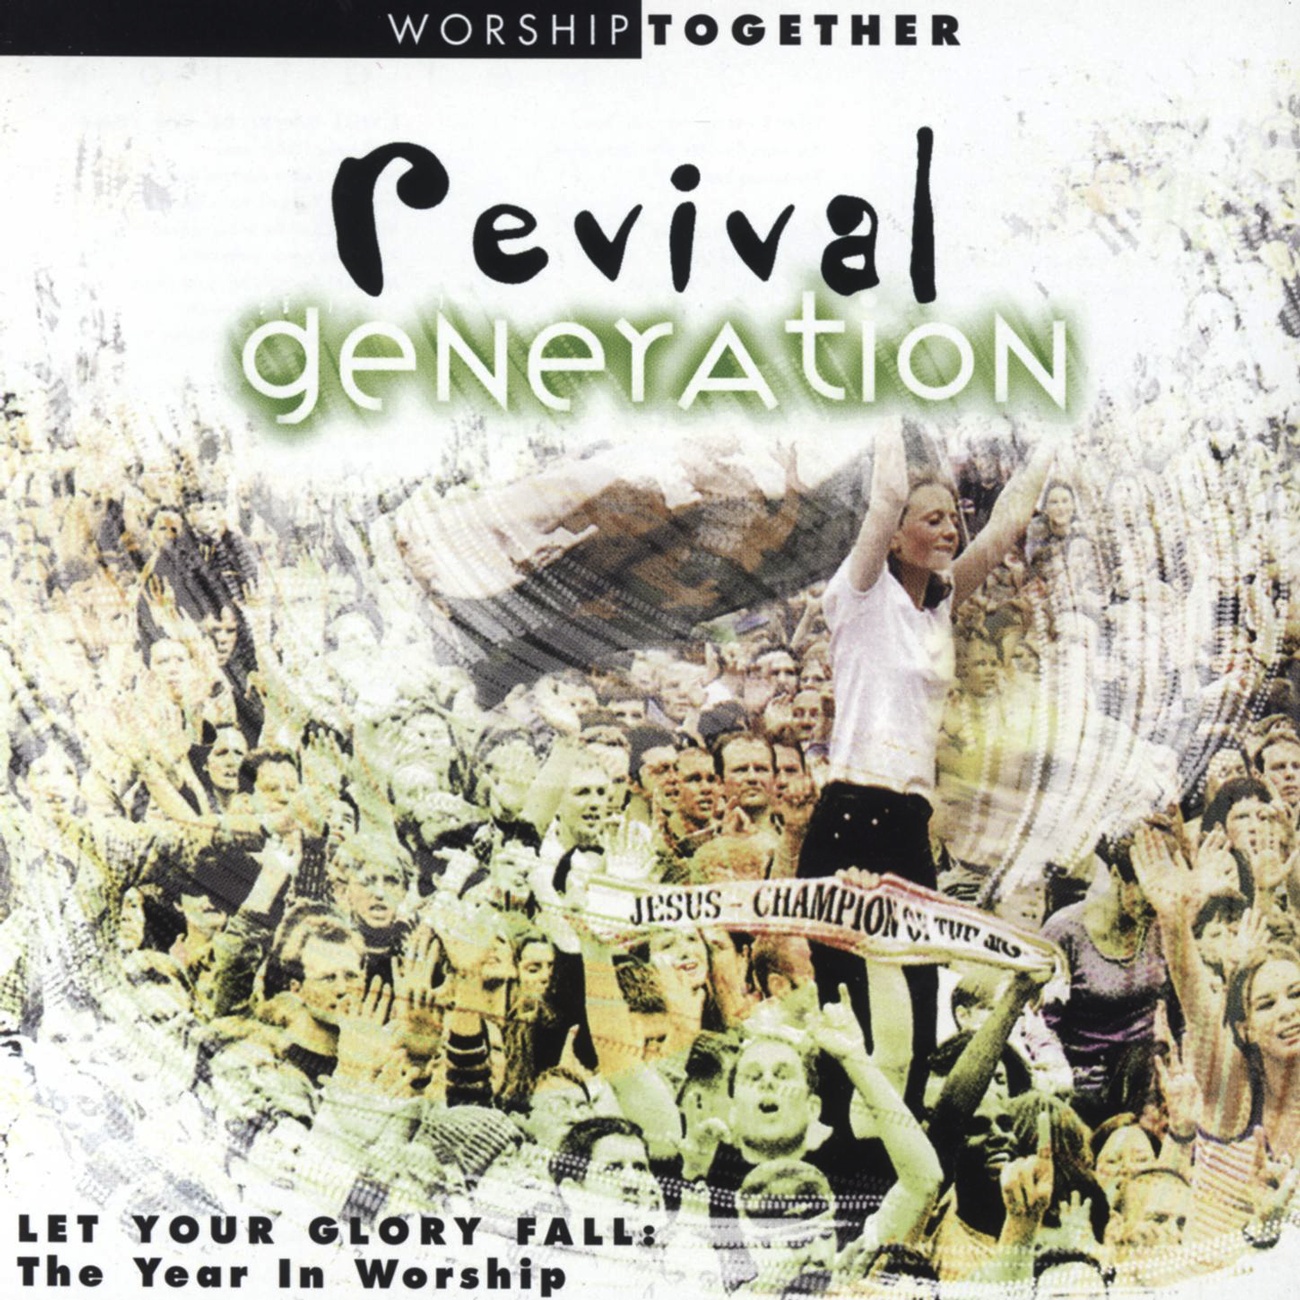 Let Your Glory Fall (Rev.Gen:Let Your Glory Fall Album Version)